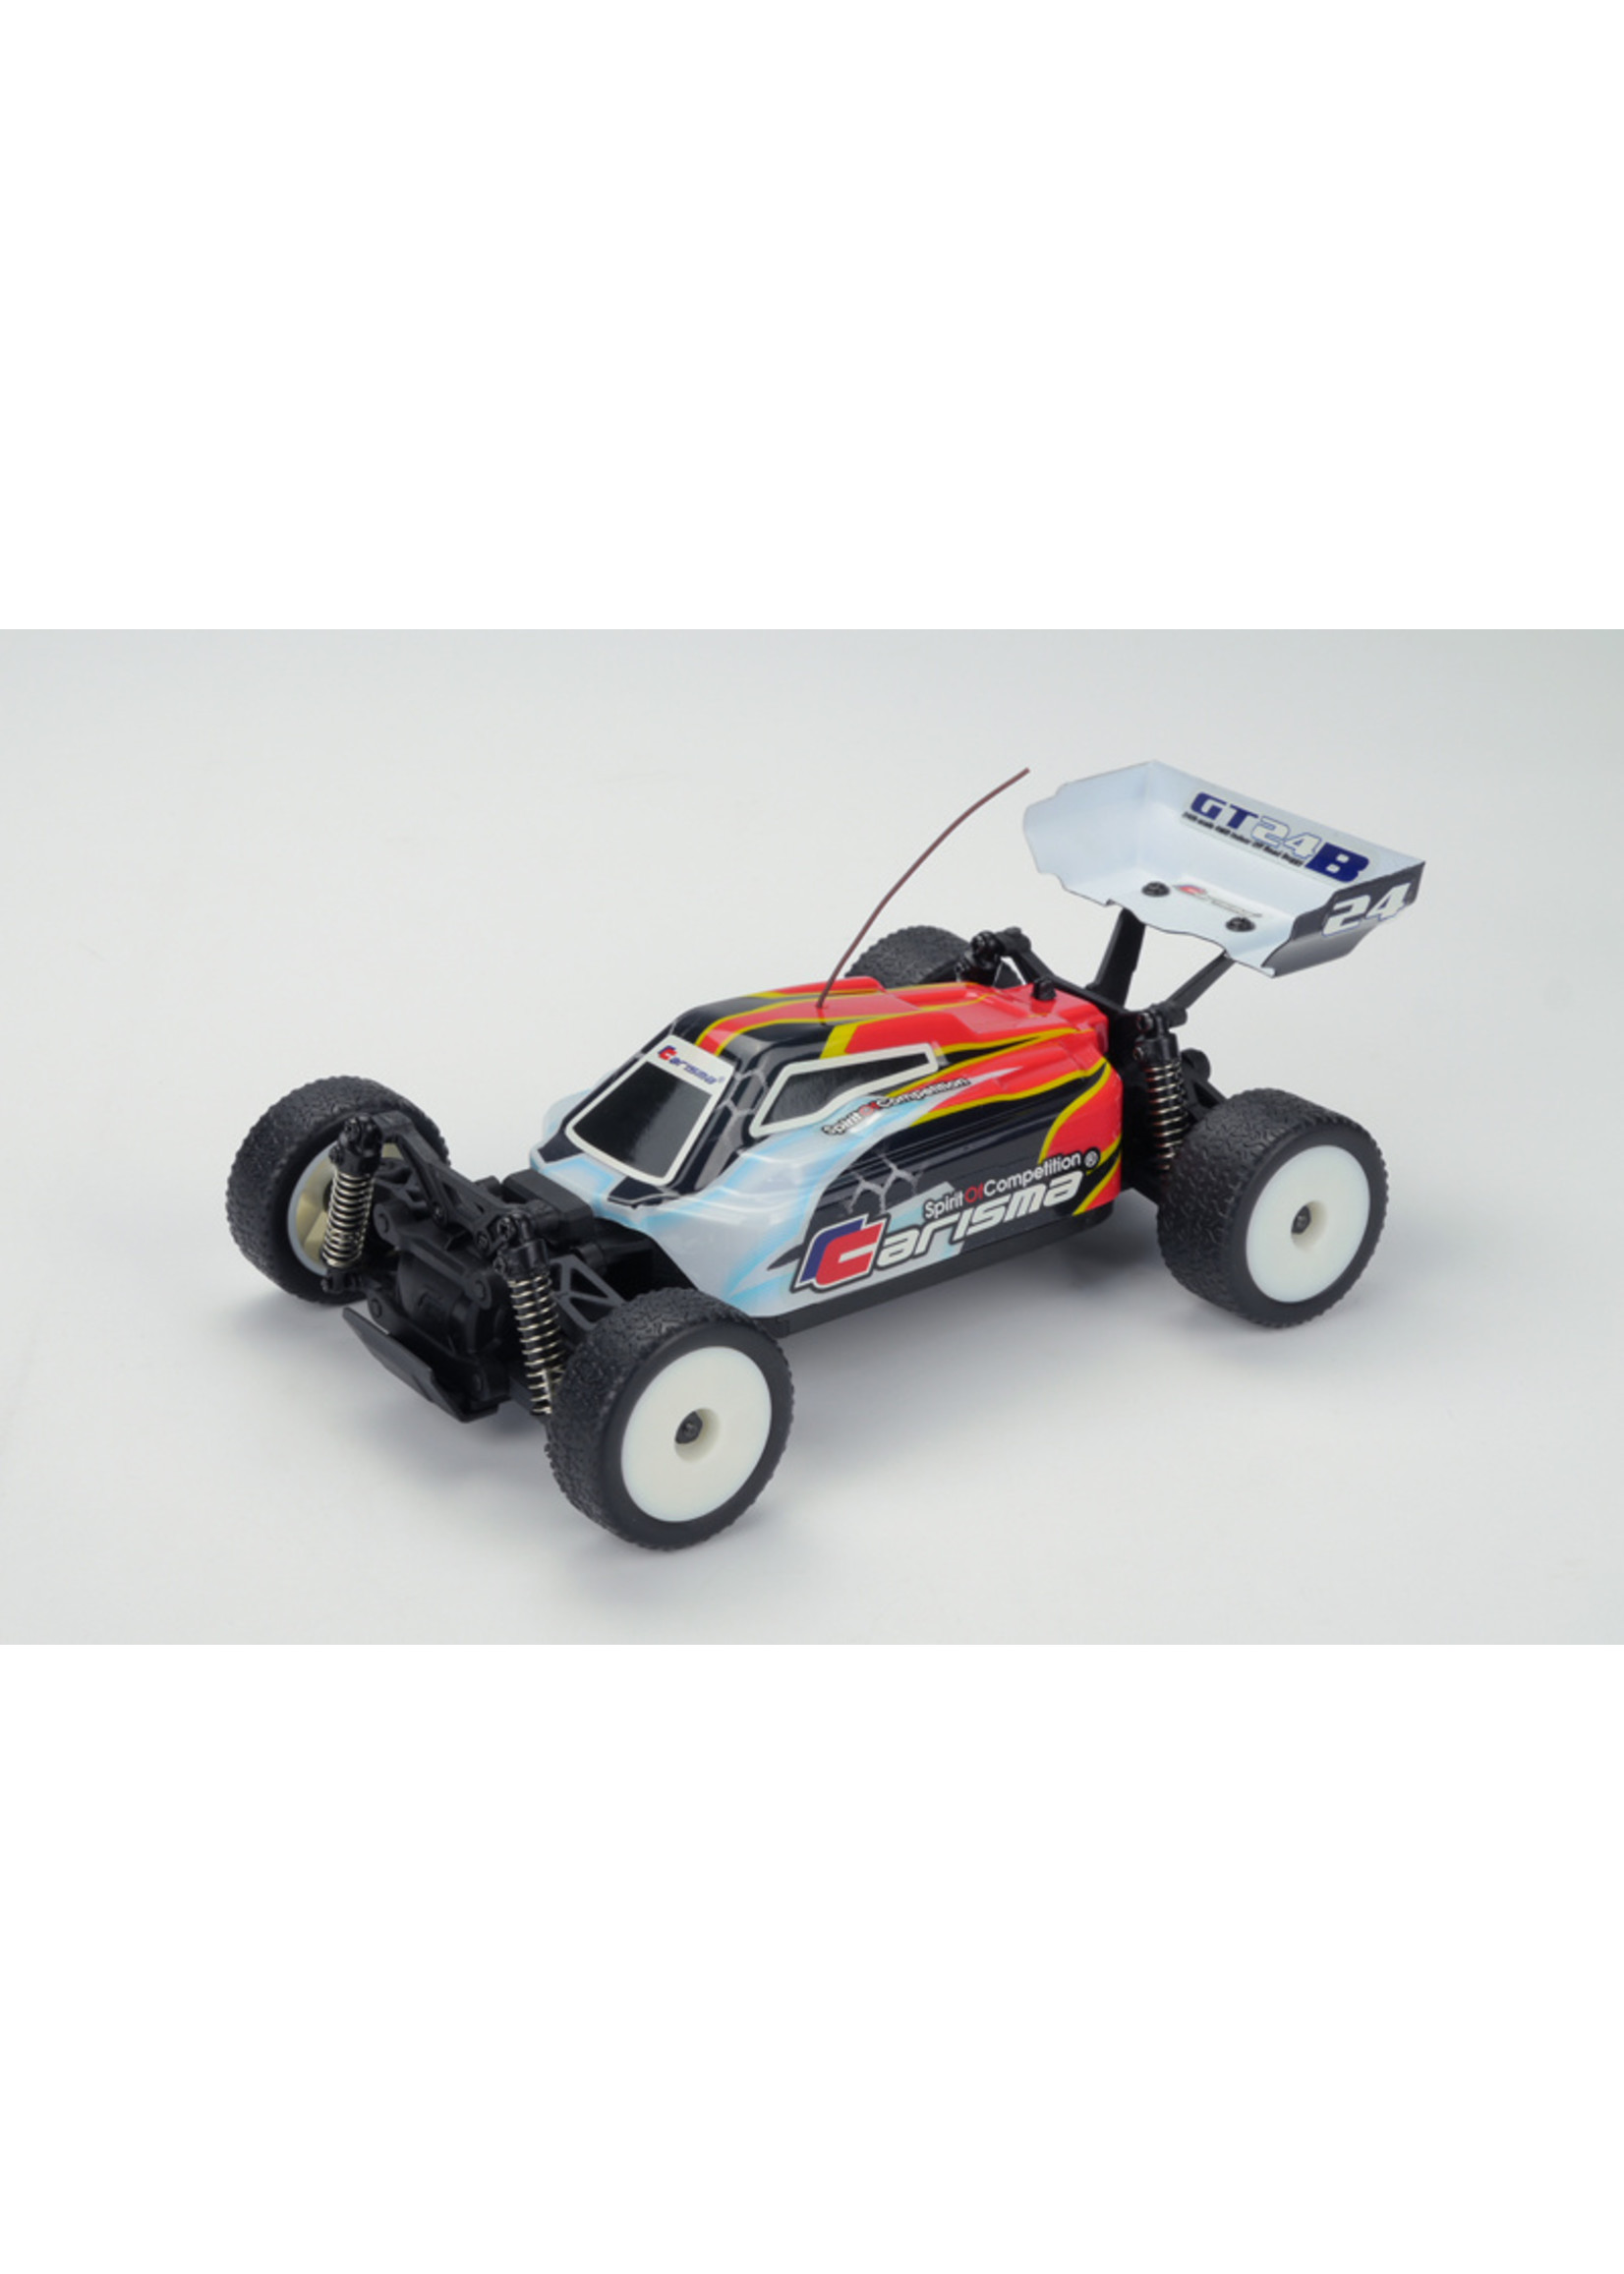 Carisma GT24B Racers Edition 4wd 1/24 Brushless Micro Buggy RTR 81668 New!! 